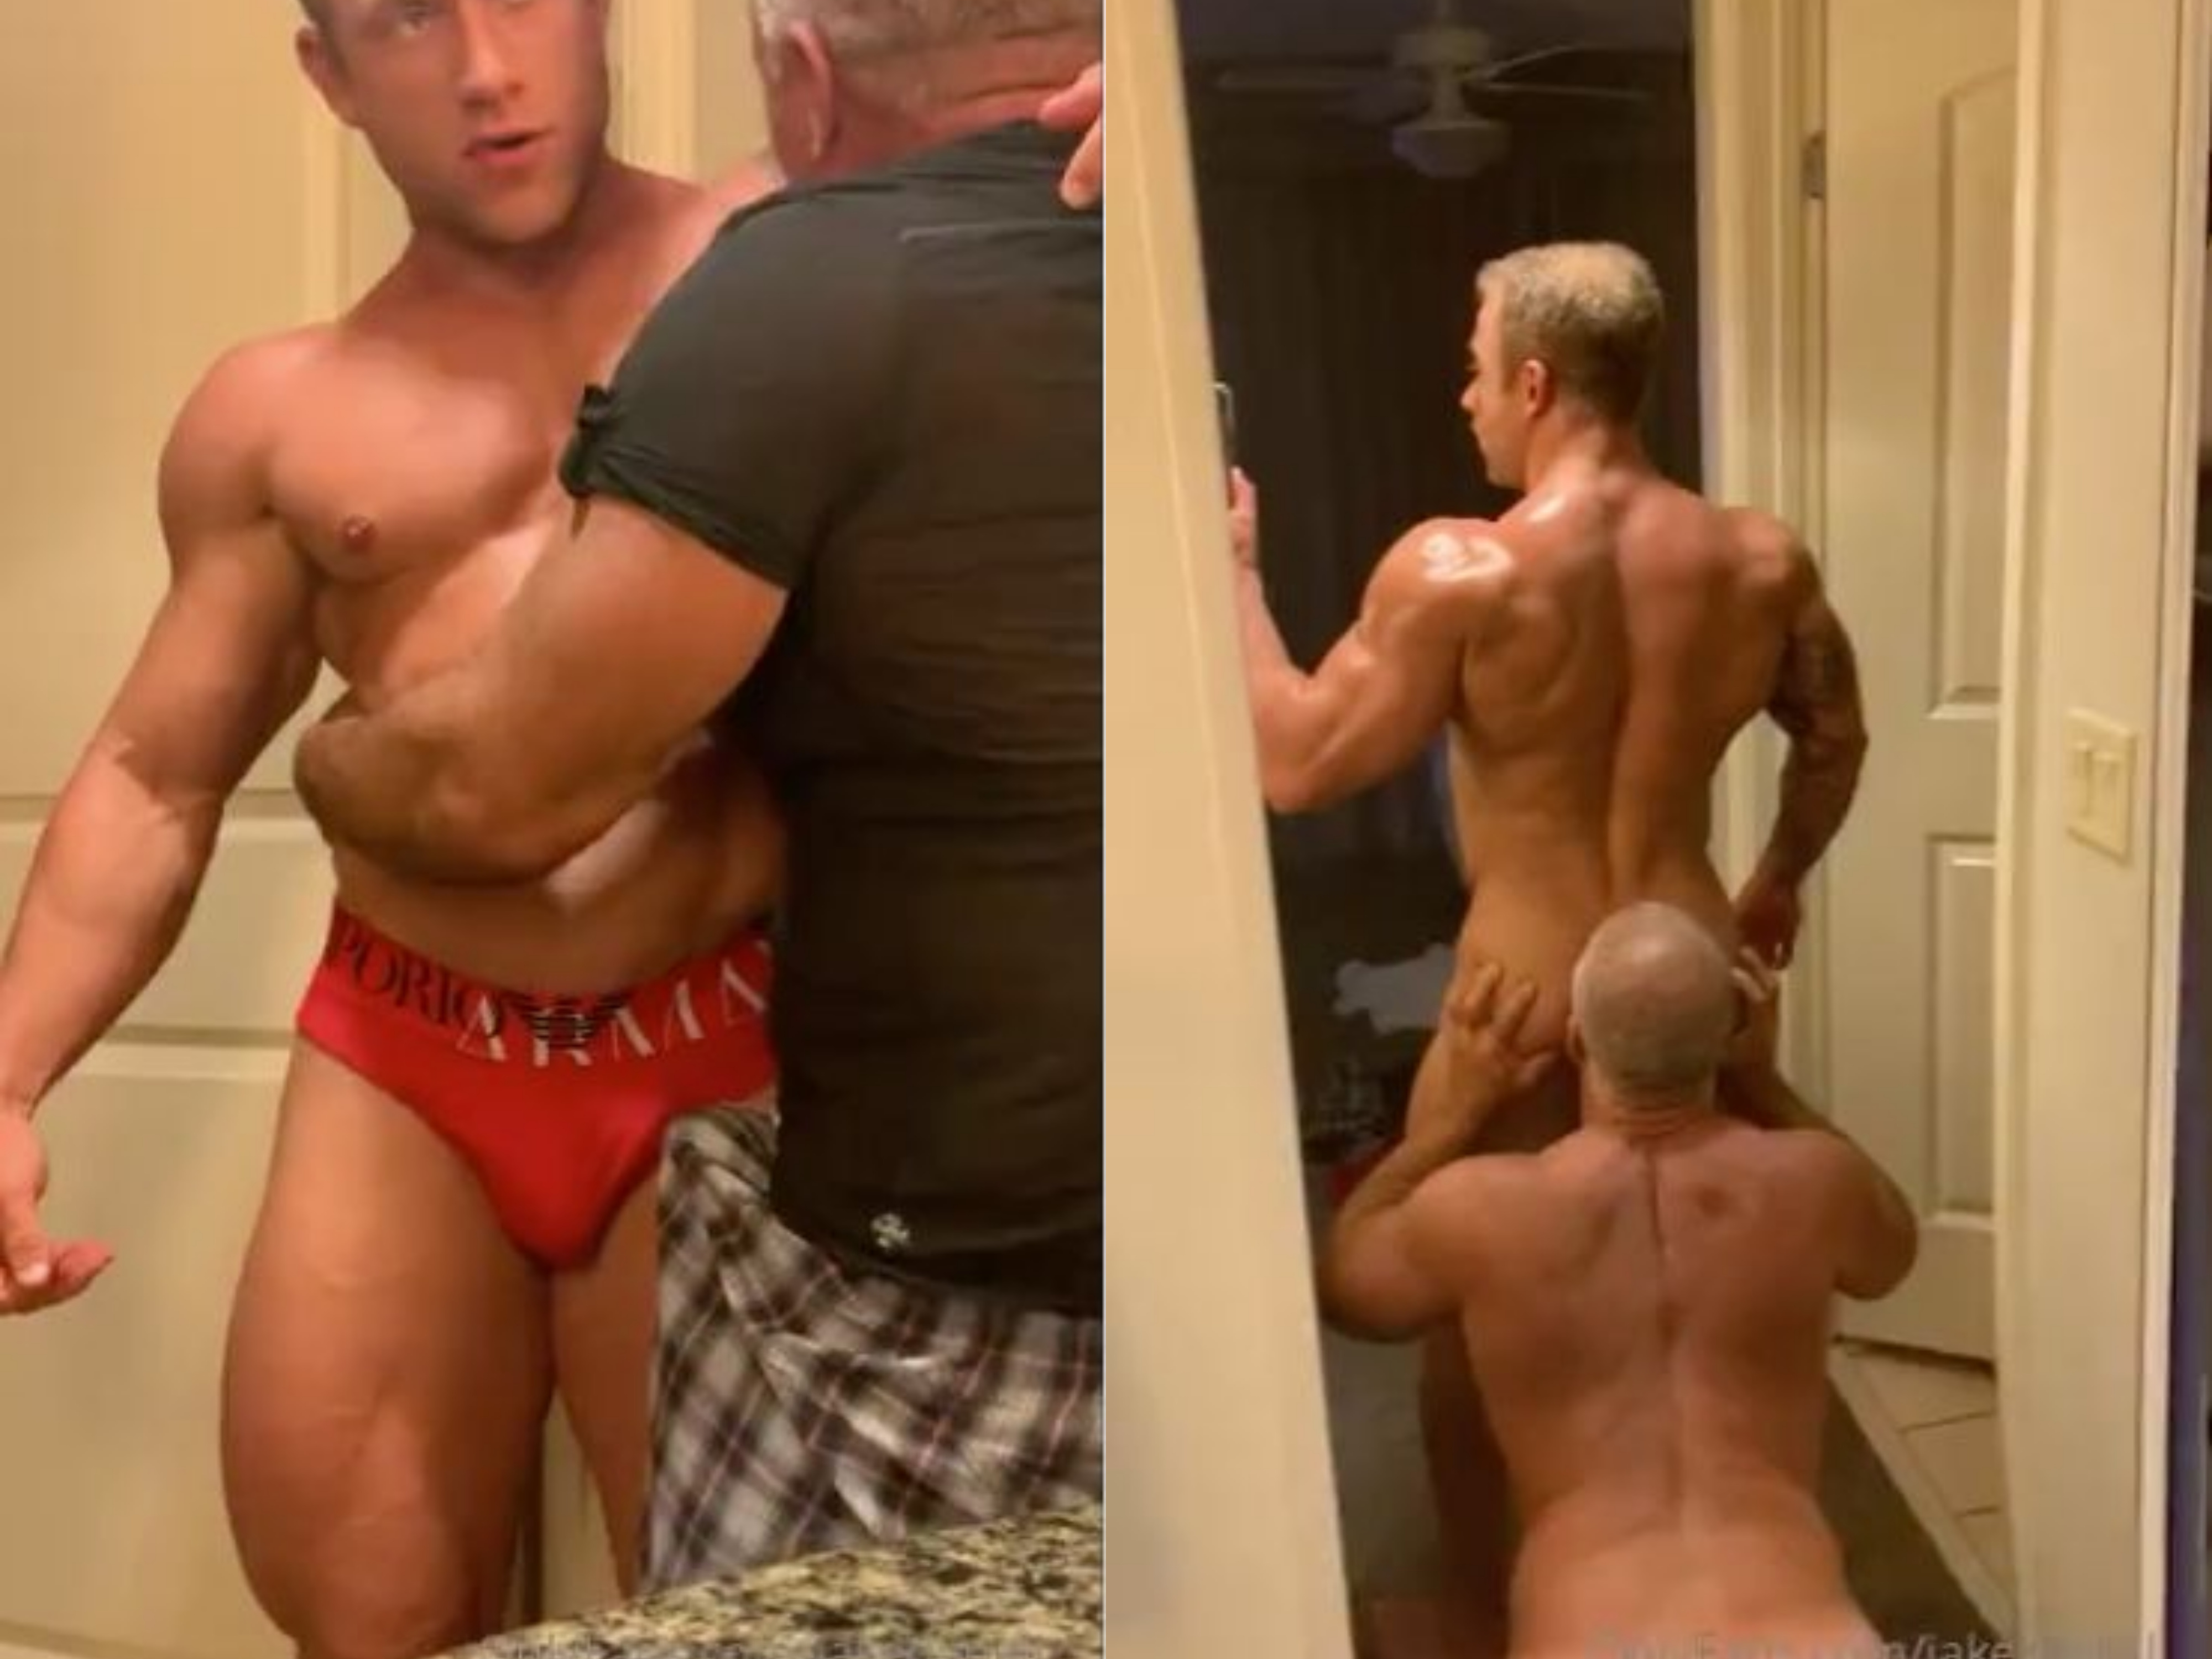 Old man worship and sex with bodybuilder pic